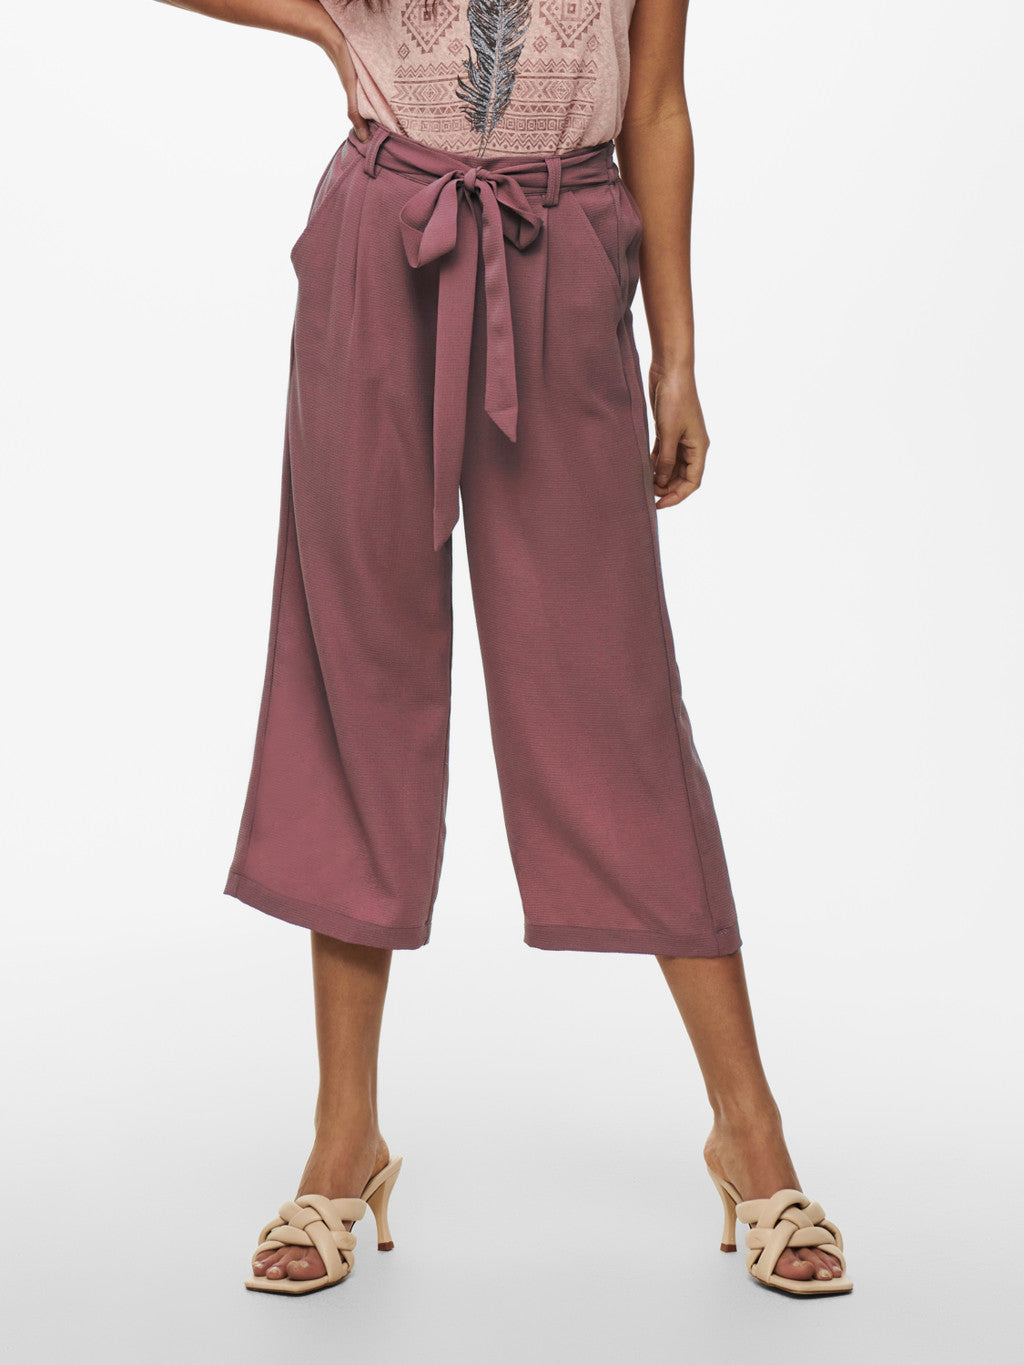 ONLY women's dusky pink palazzo pants